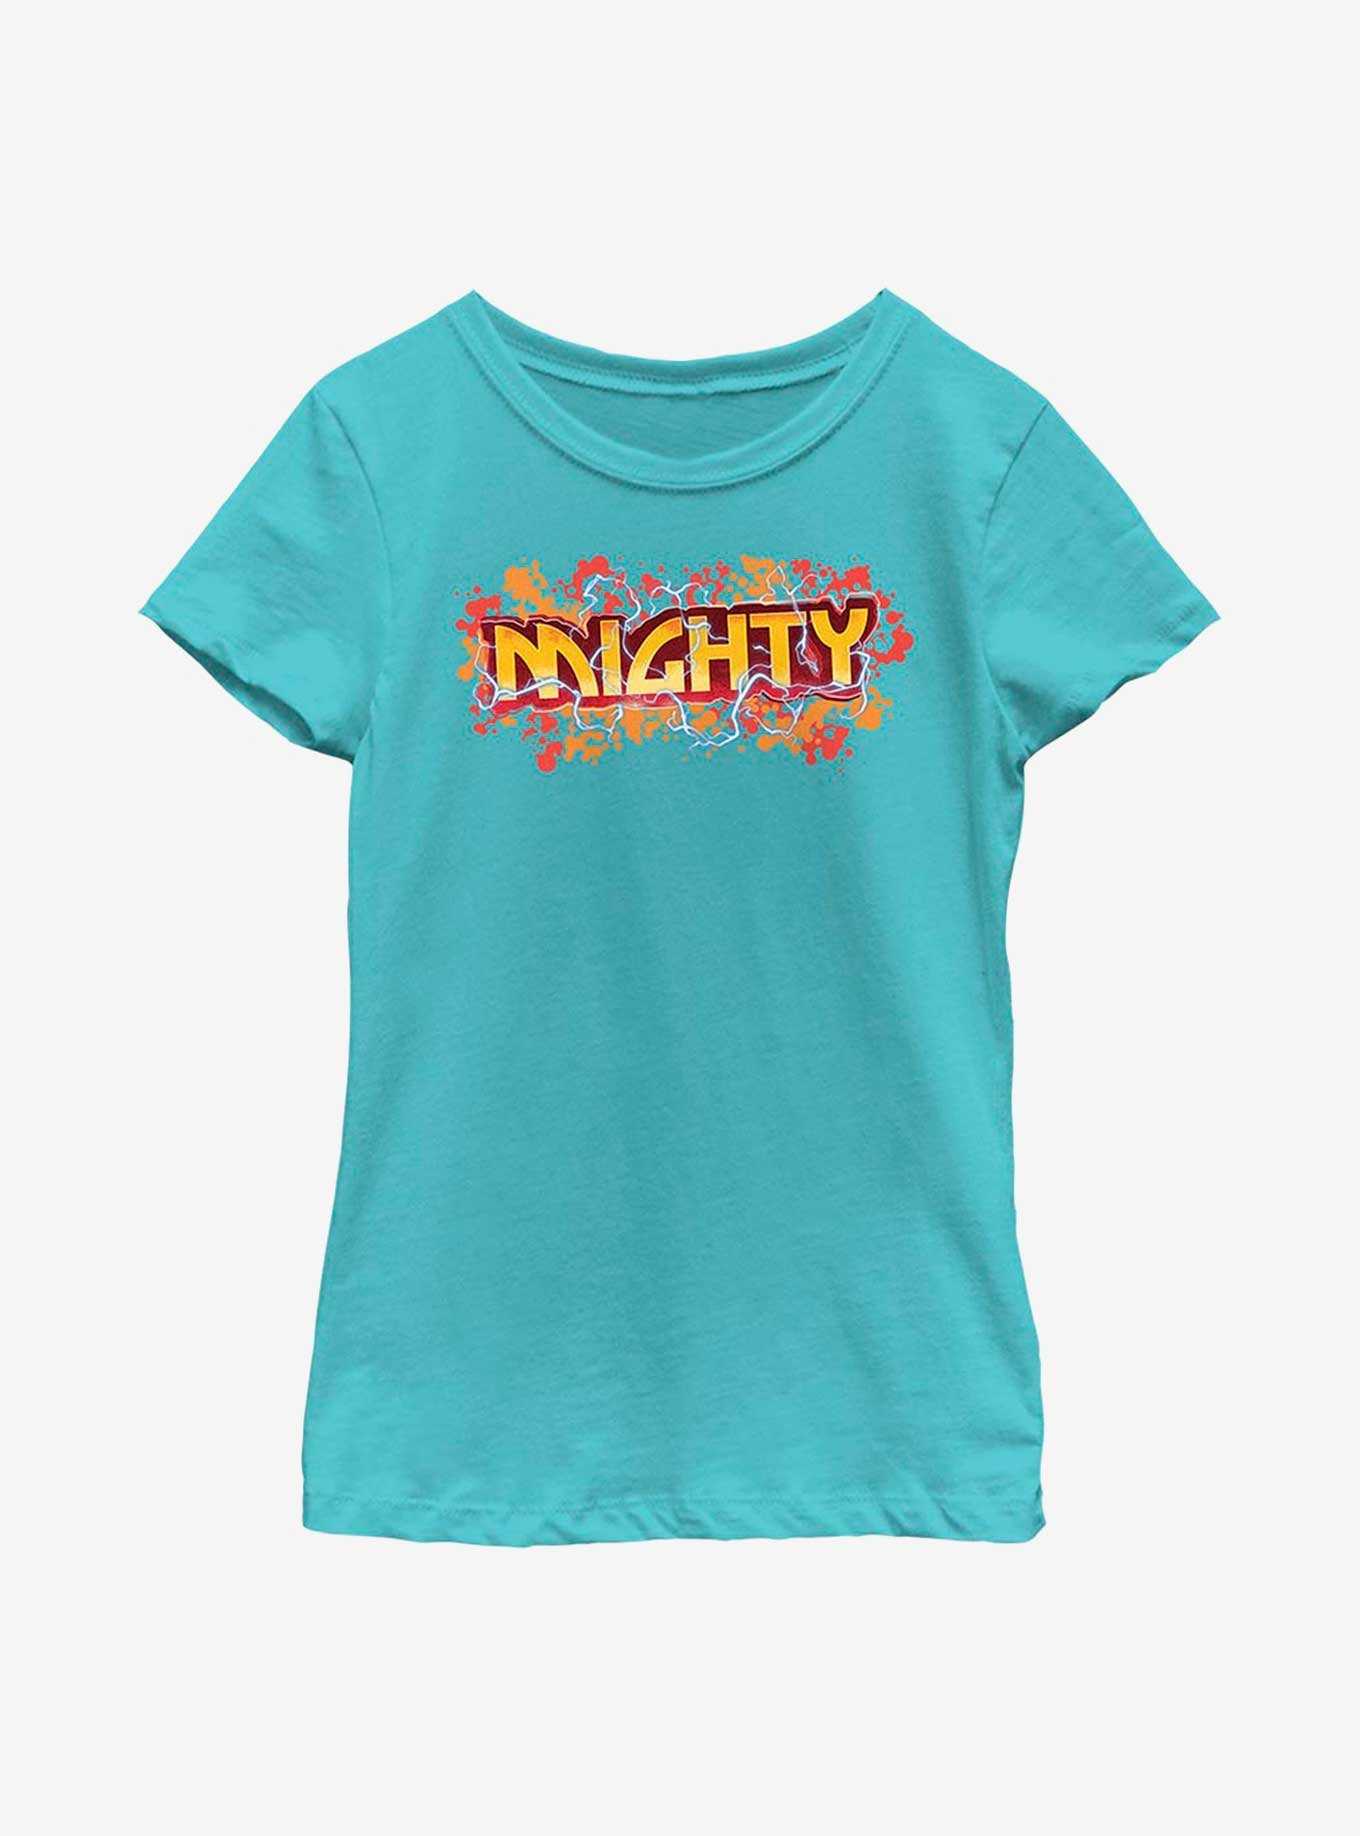 Marvel Thor: Love And Thunder Electric Mighty Youth Girls T-Shirt, , hi-res